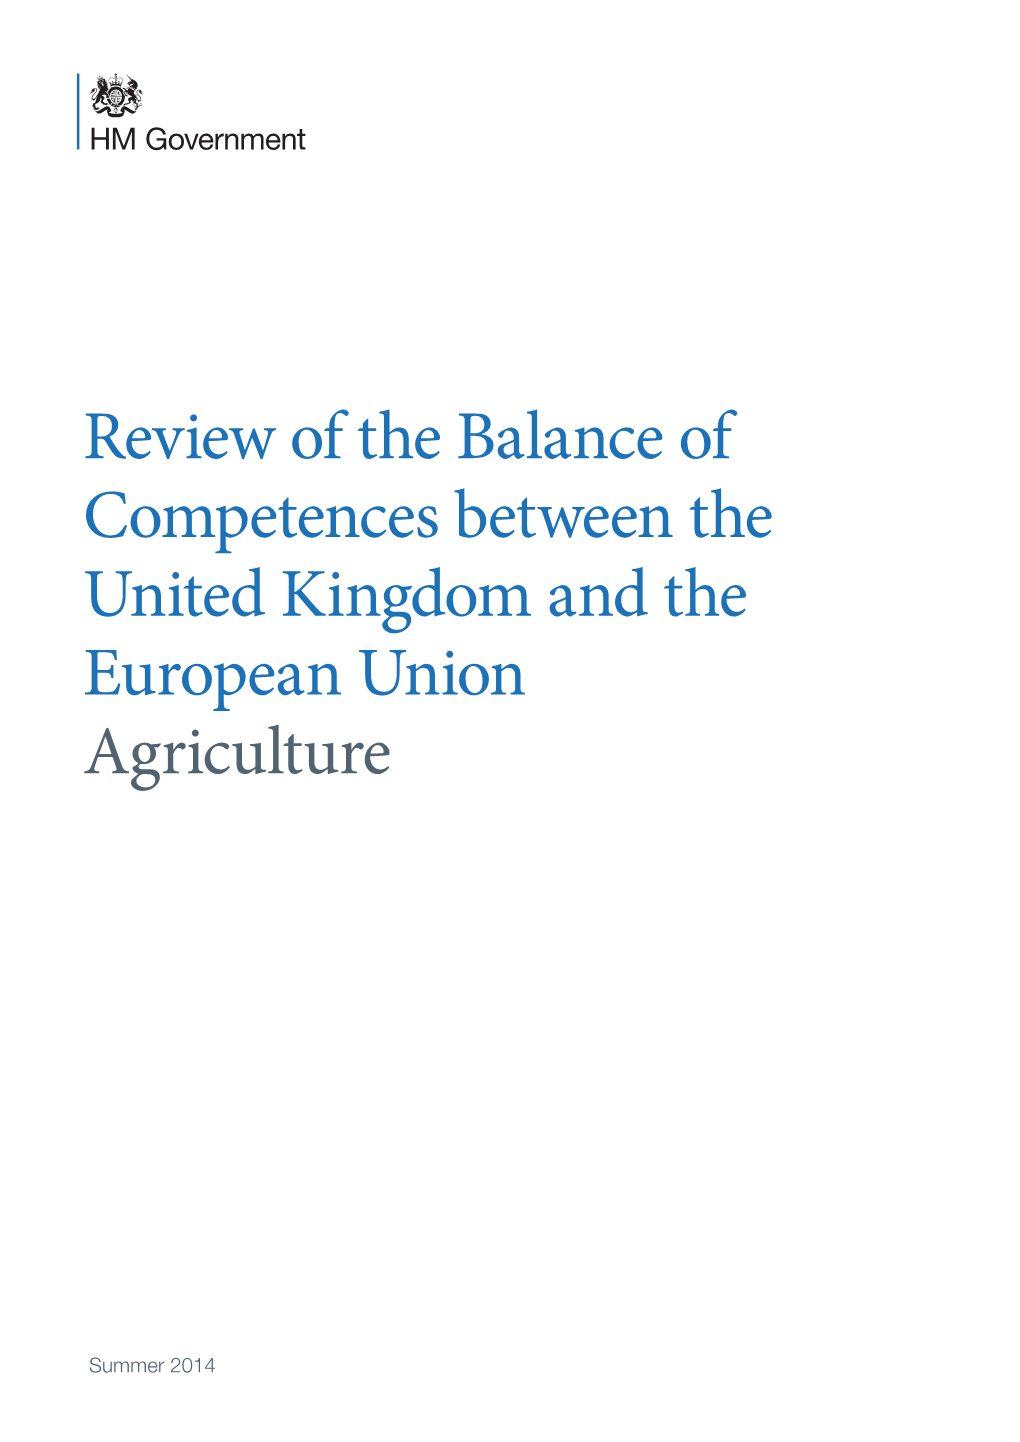 Review of the Balance of Competences Between the United Kingdom and the European Union Agriculture